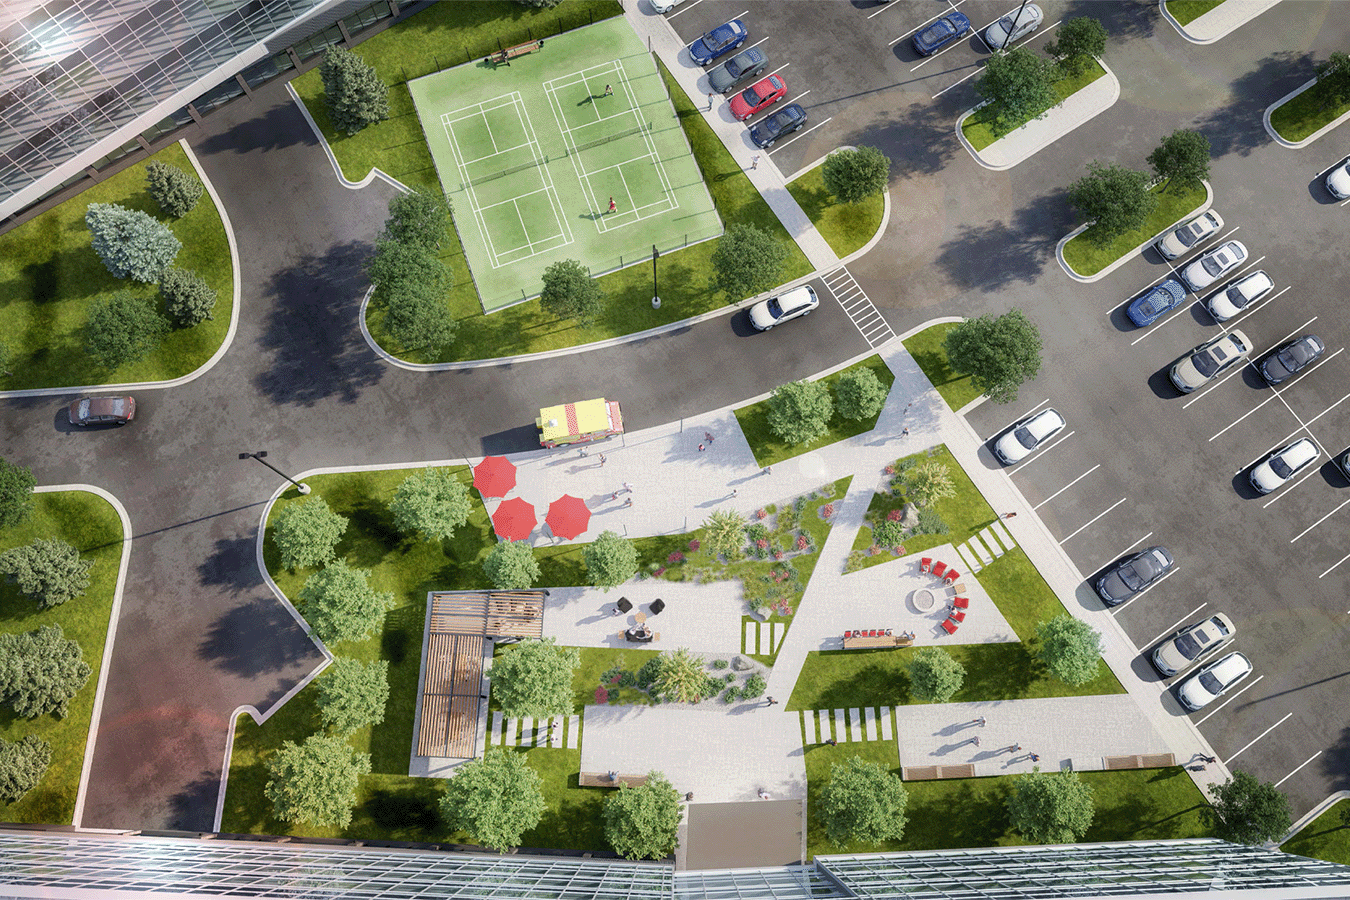 aerial view of outdoor seating area with firepits and pickleball courts